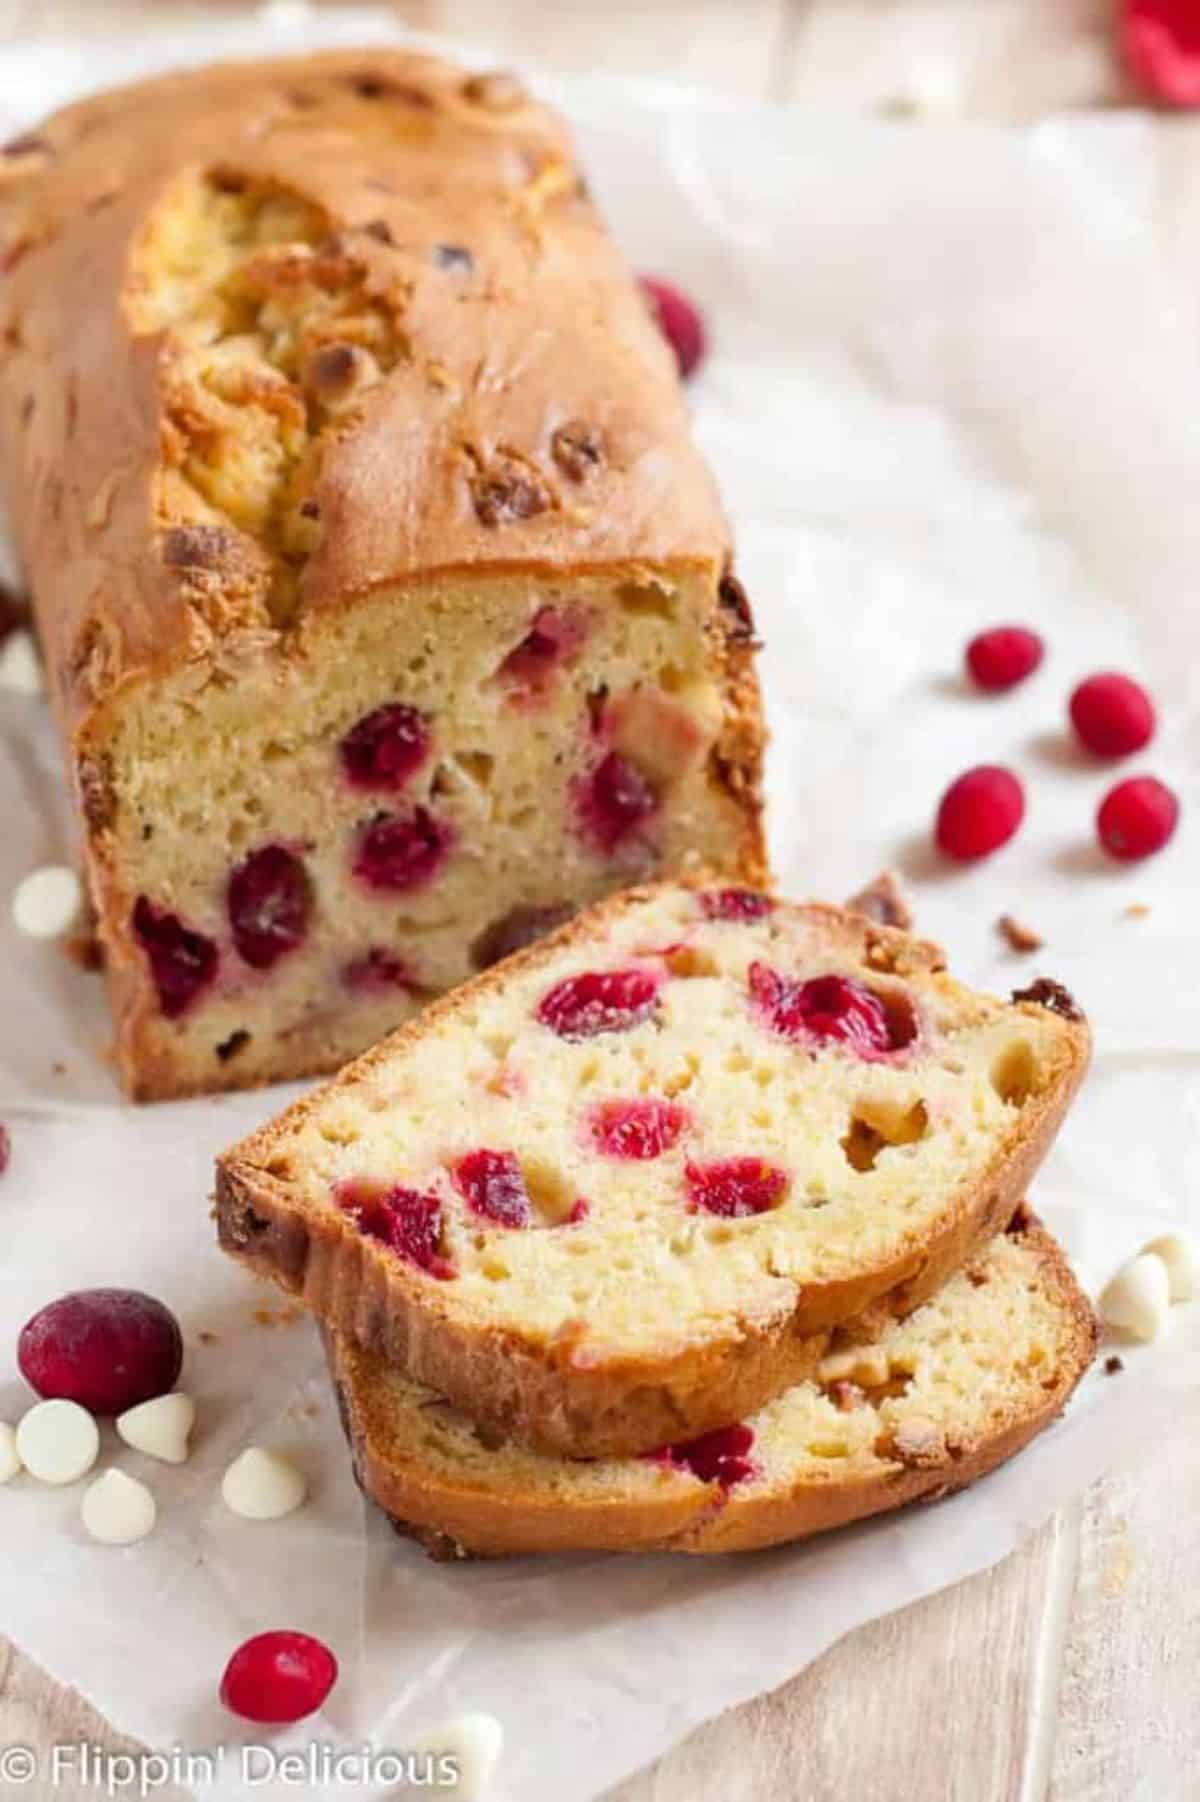 Partially sliced Gluten-free Cranberry Bread with Orange, White Chocolate, and Hazelnuts.